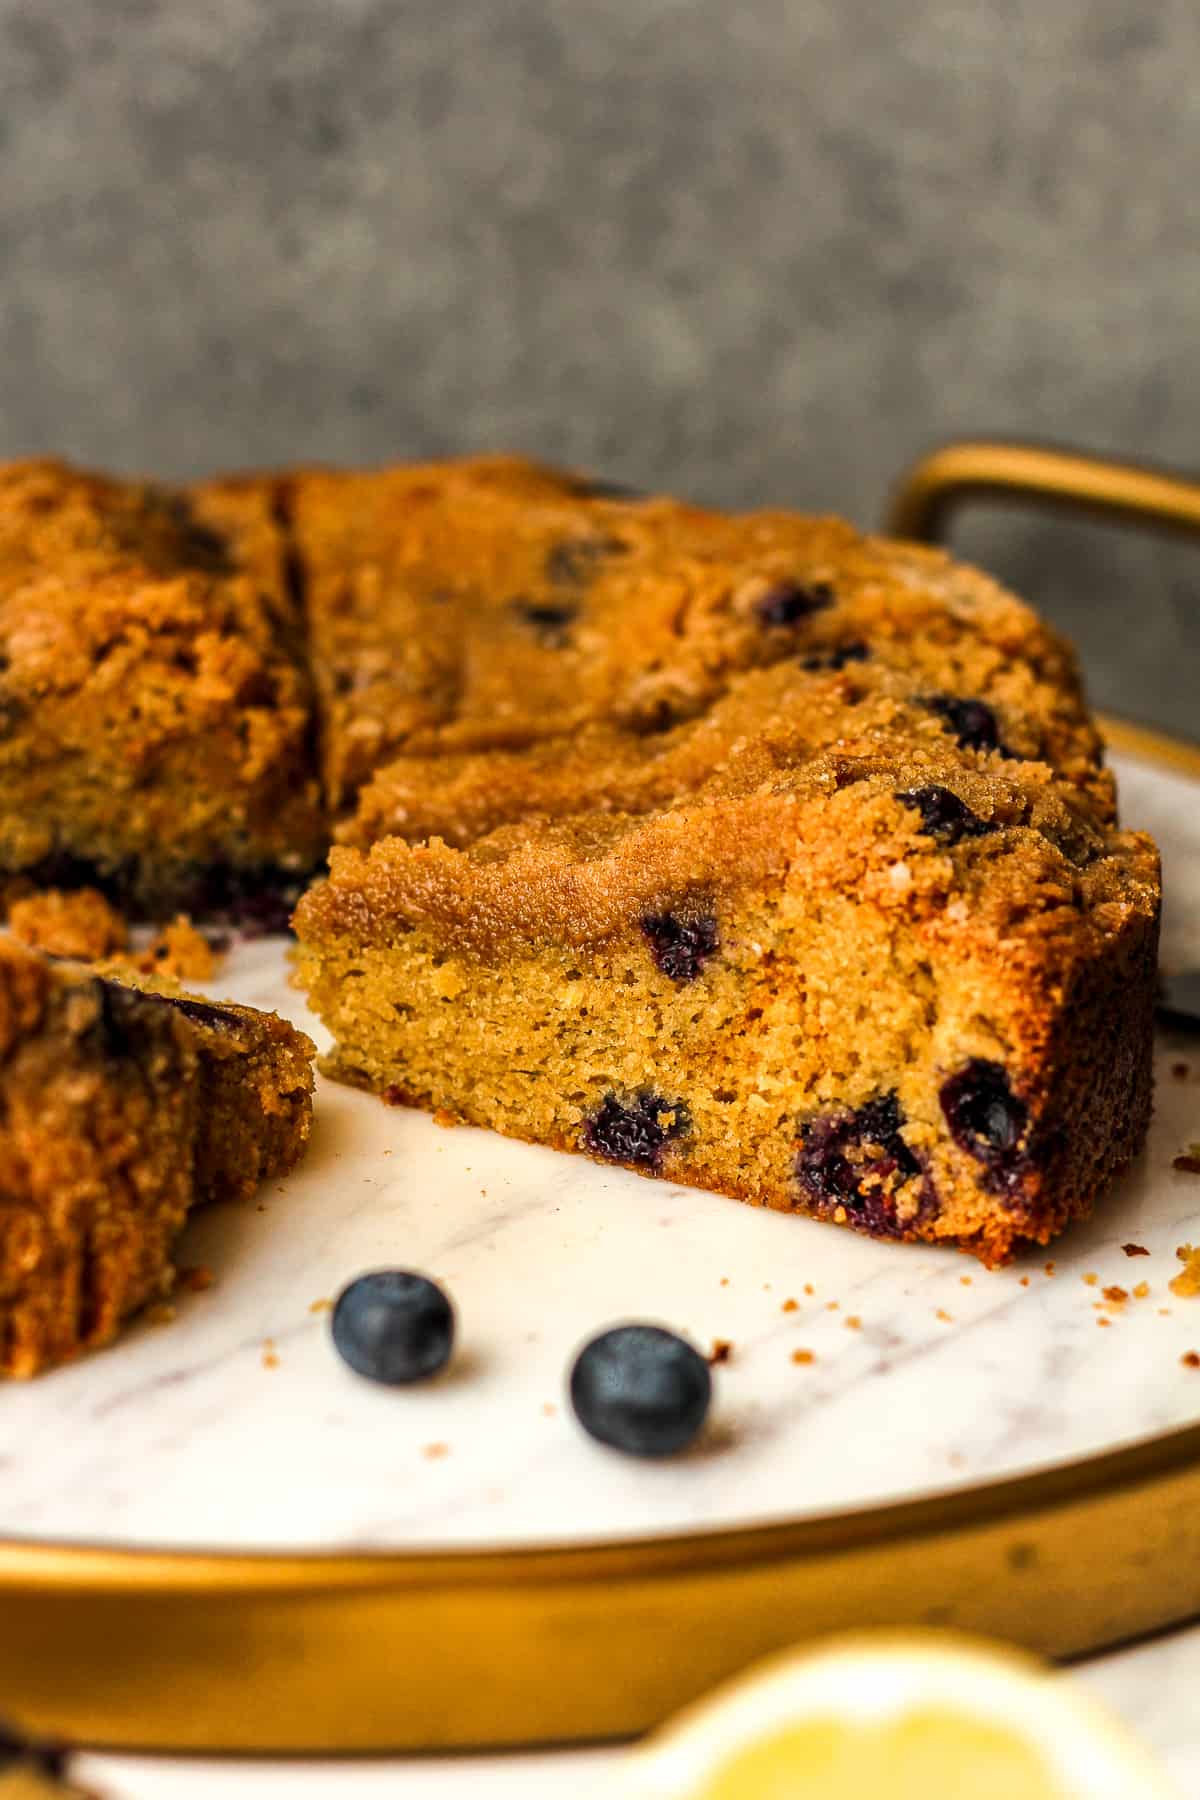 A side view of a platter of sliced coffee cake with blueberries.